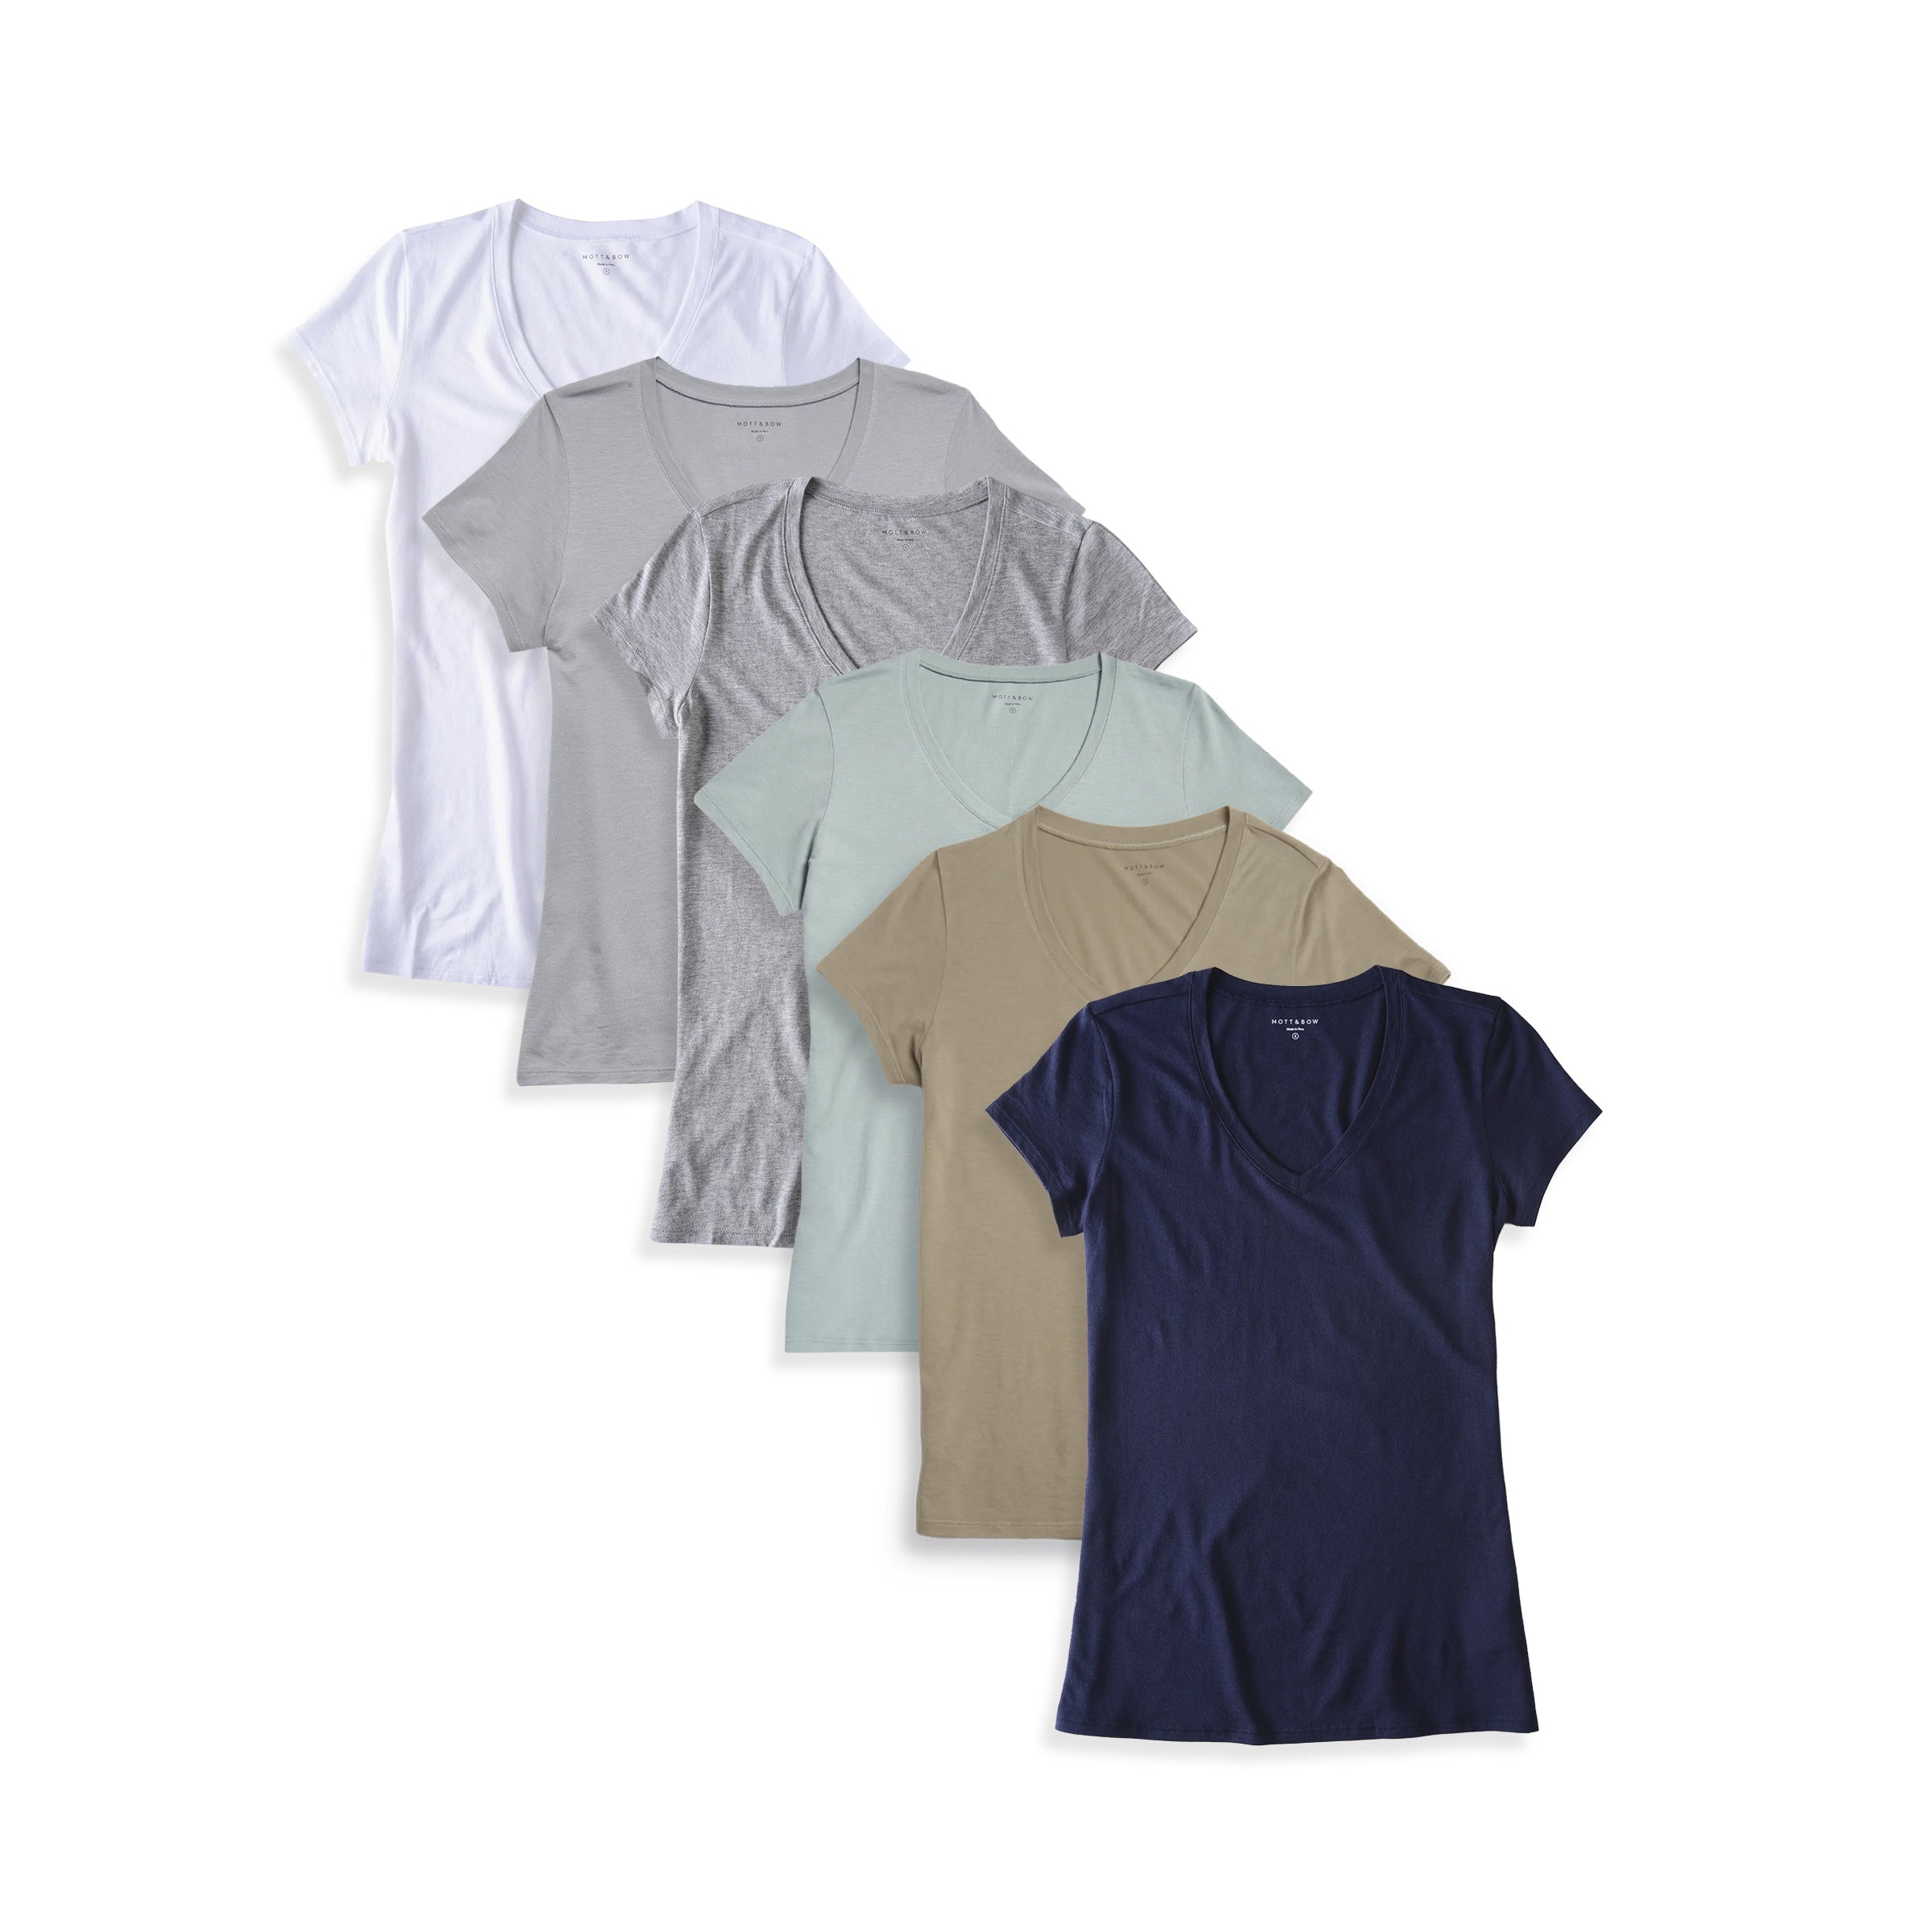  wearing White/Light Gray/Heather Gray/Vine/Olive/Navy Fitted V-Neck Marcy 6-Pack